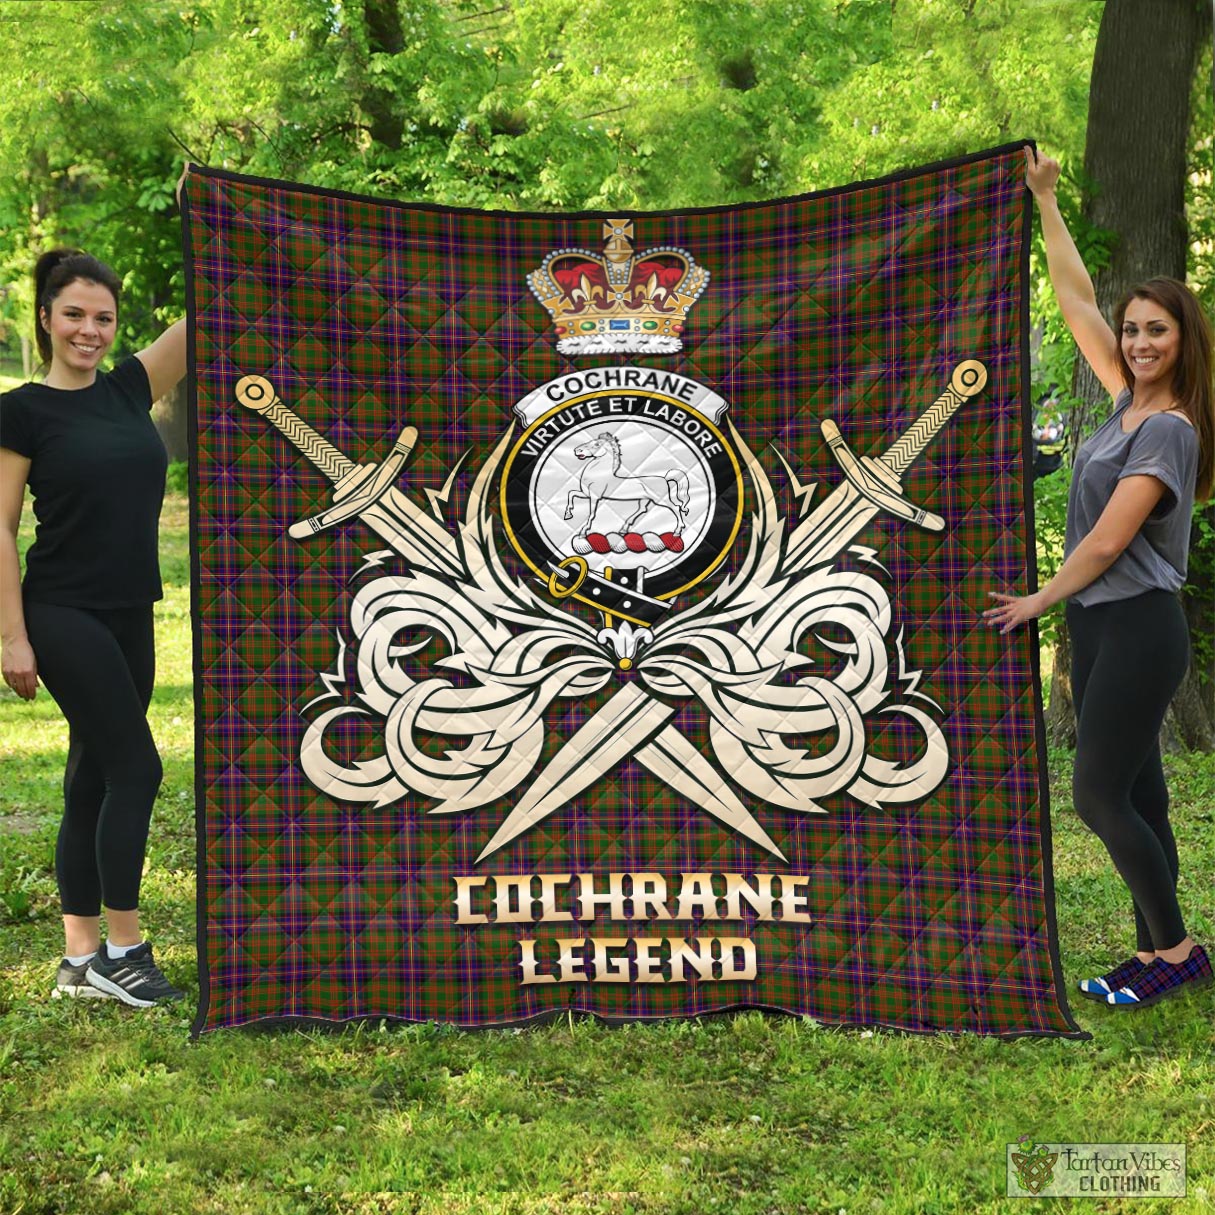 Tartan Vibes Clothing Cochrane Modern Tartan Quilt with Clan Crest and the Golden Sword of Courageous Legacy